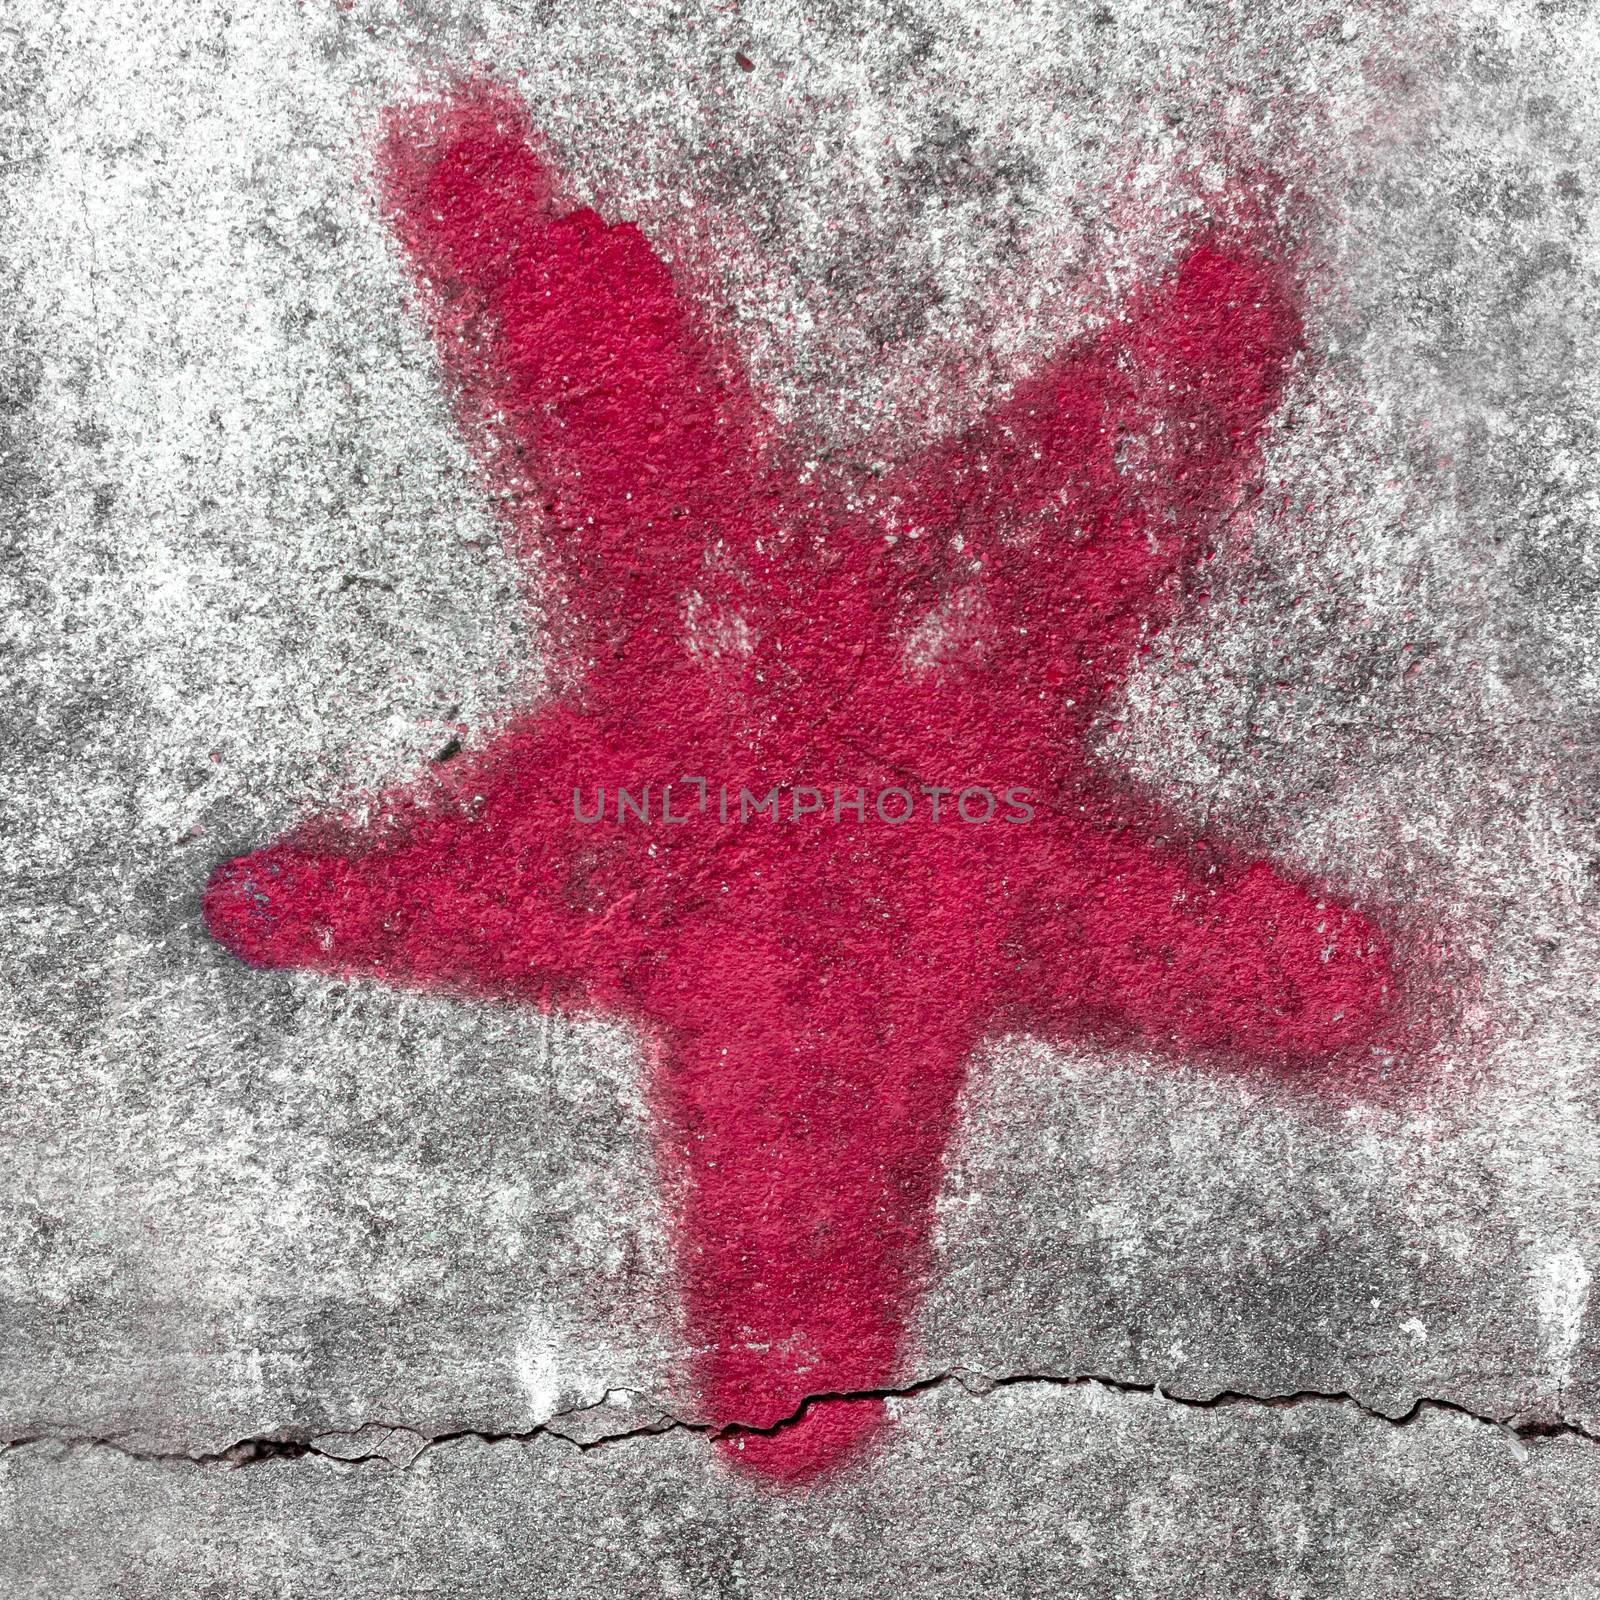 Red star painted on grungy wall